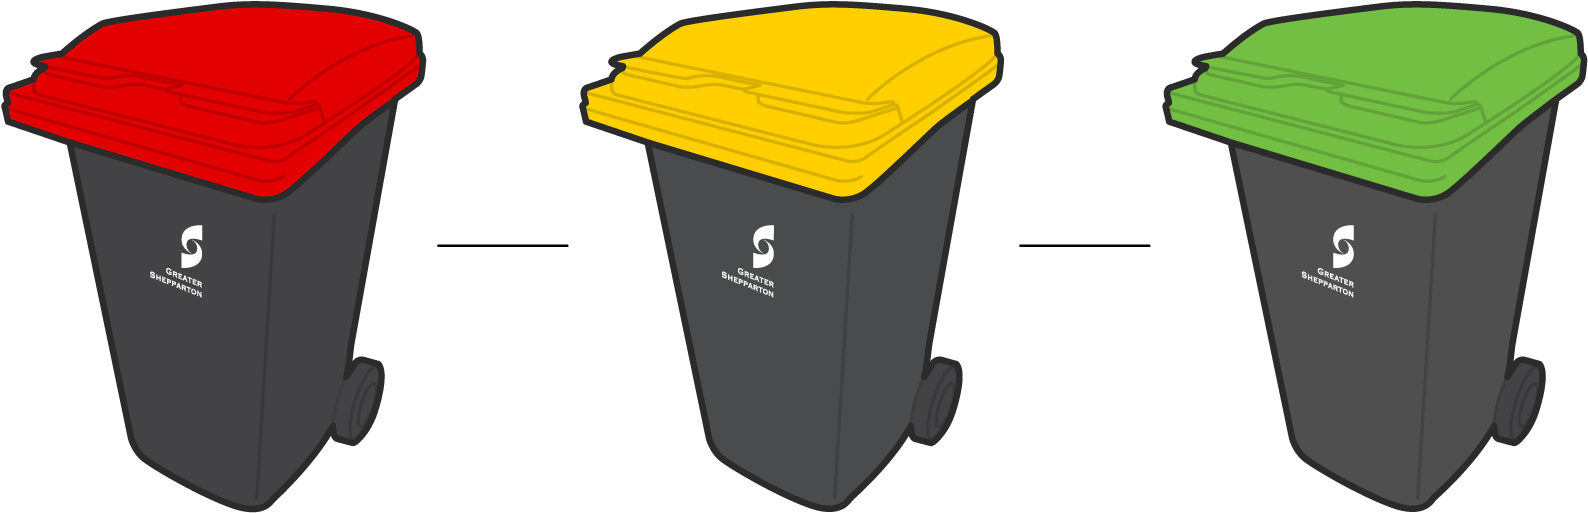 Recycling Bins Color Coded PNG